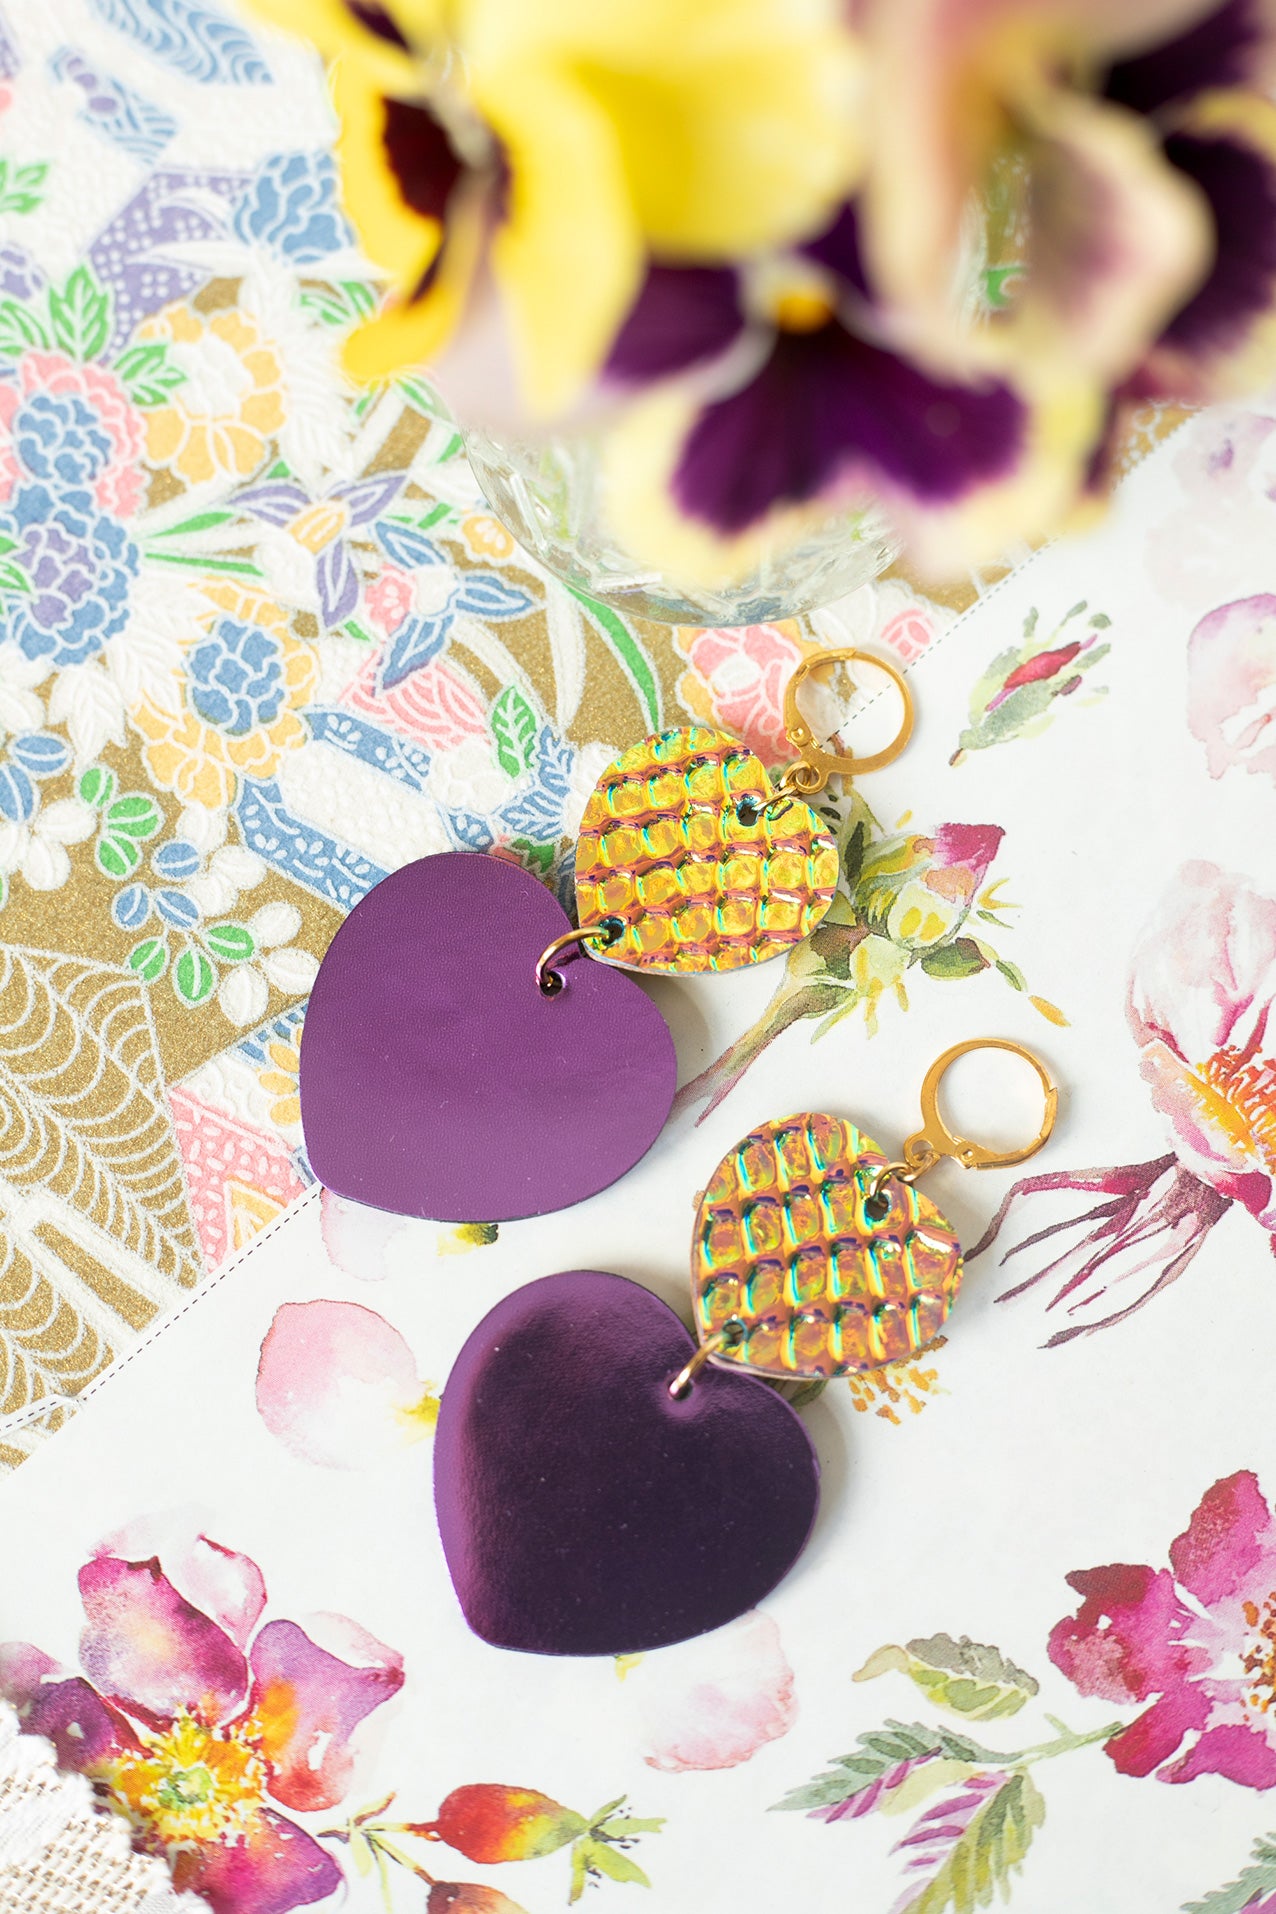 Double Hearts Earrings - holographic leather and metallic purple